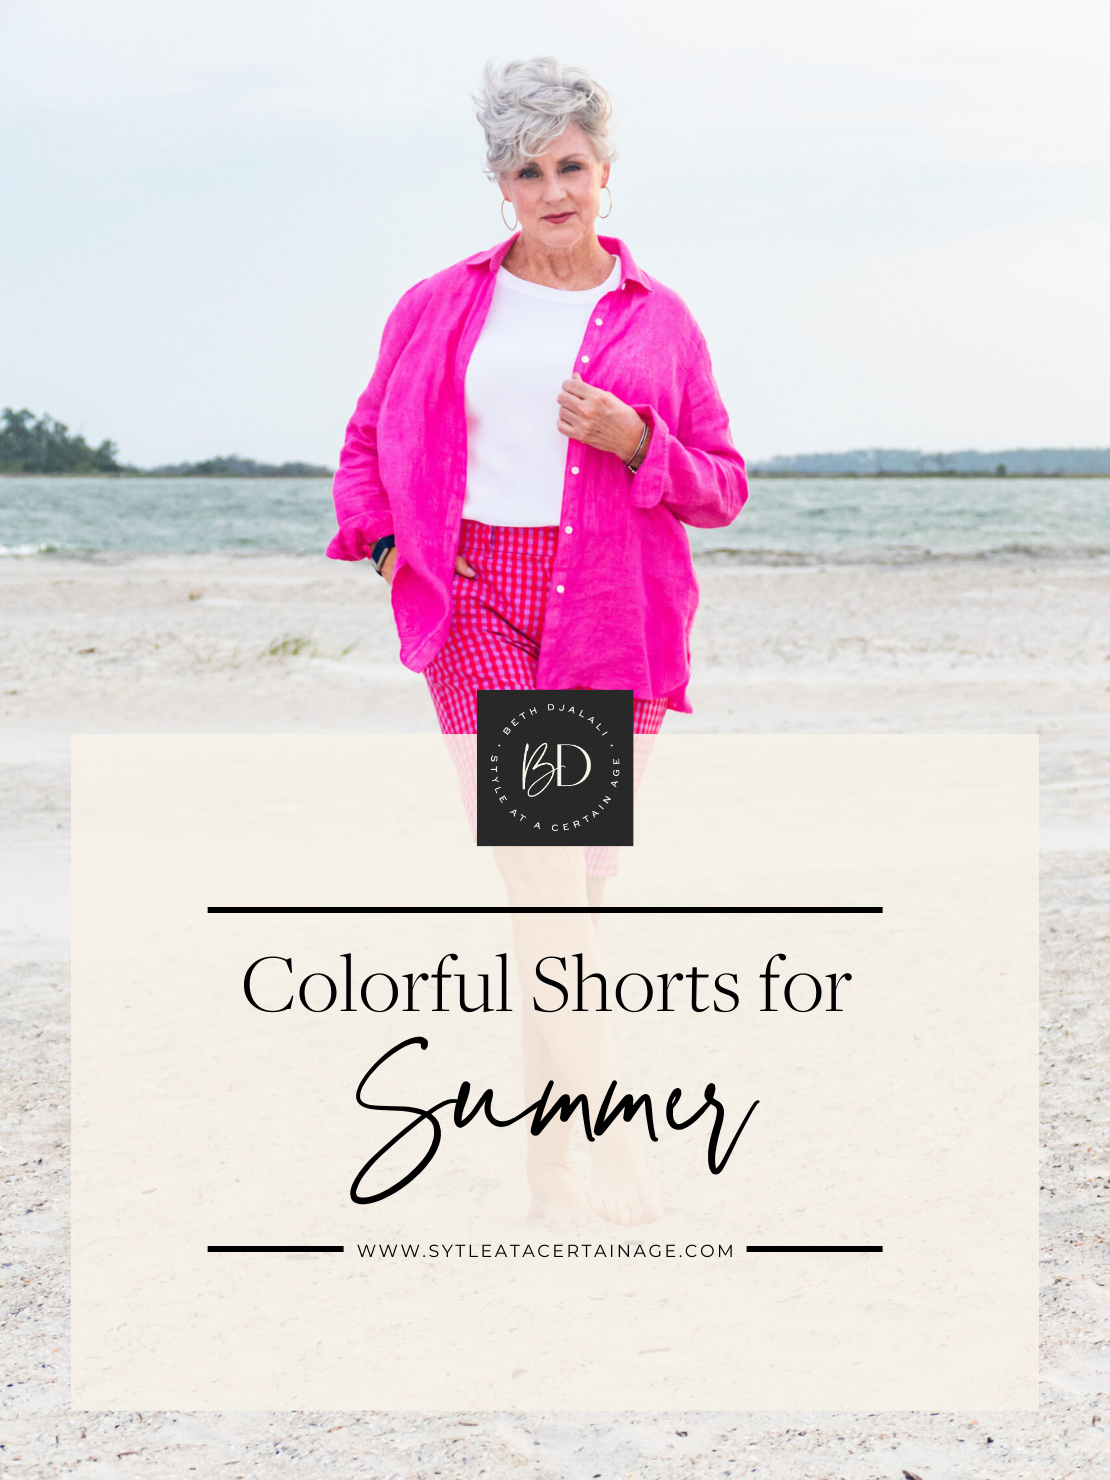 Colorful Shorts for Summer